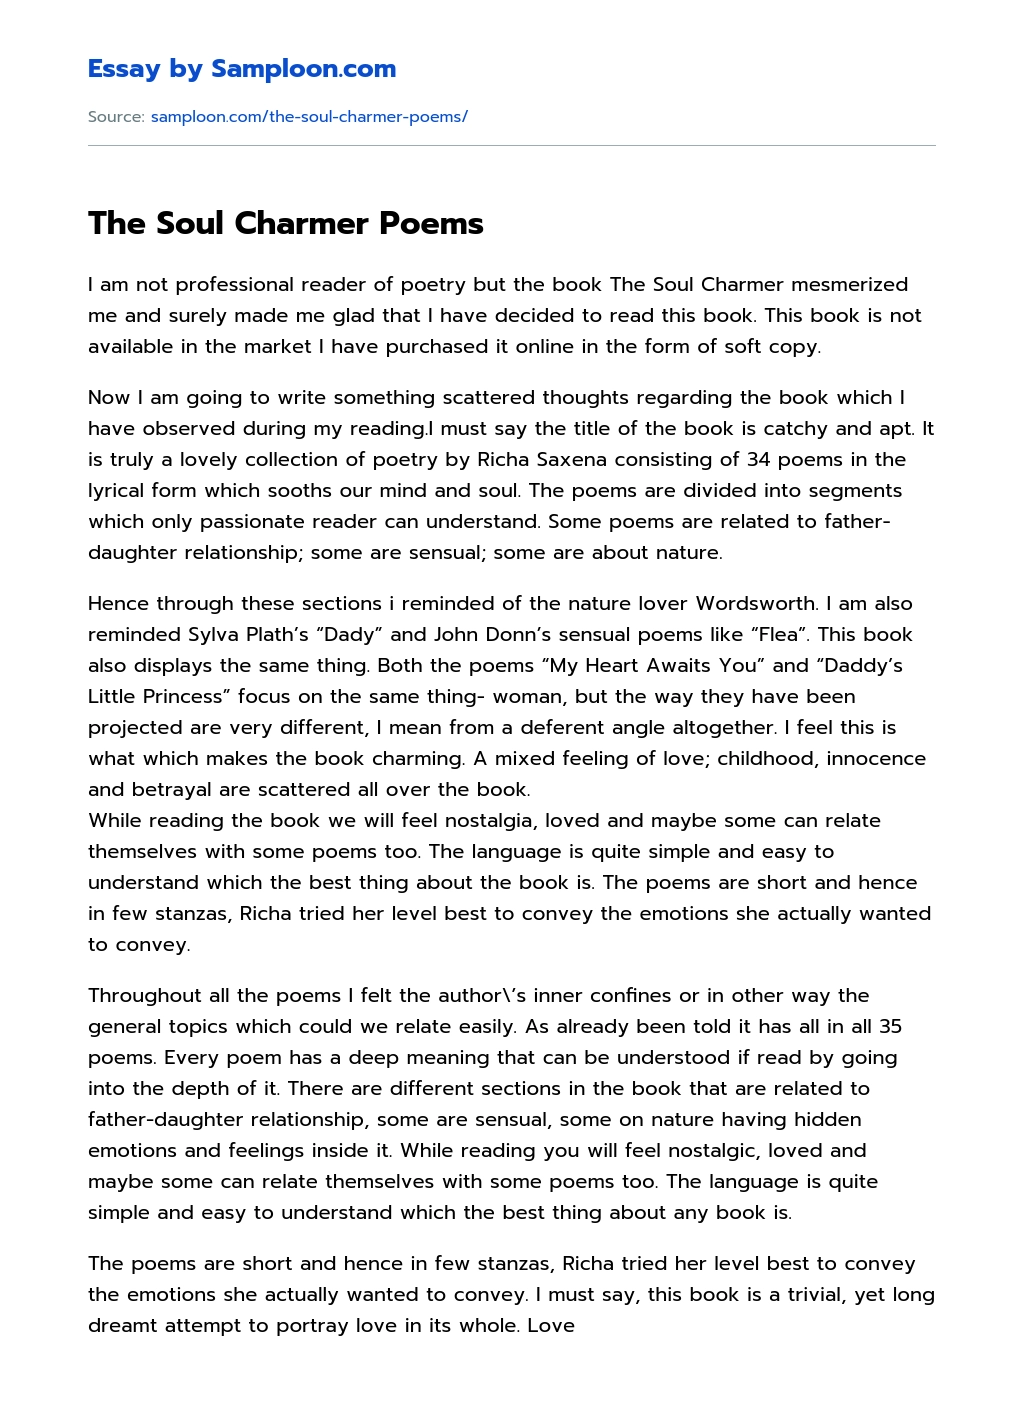 The Soul Charmer Poems essay